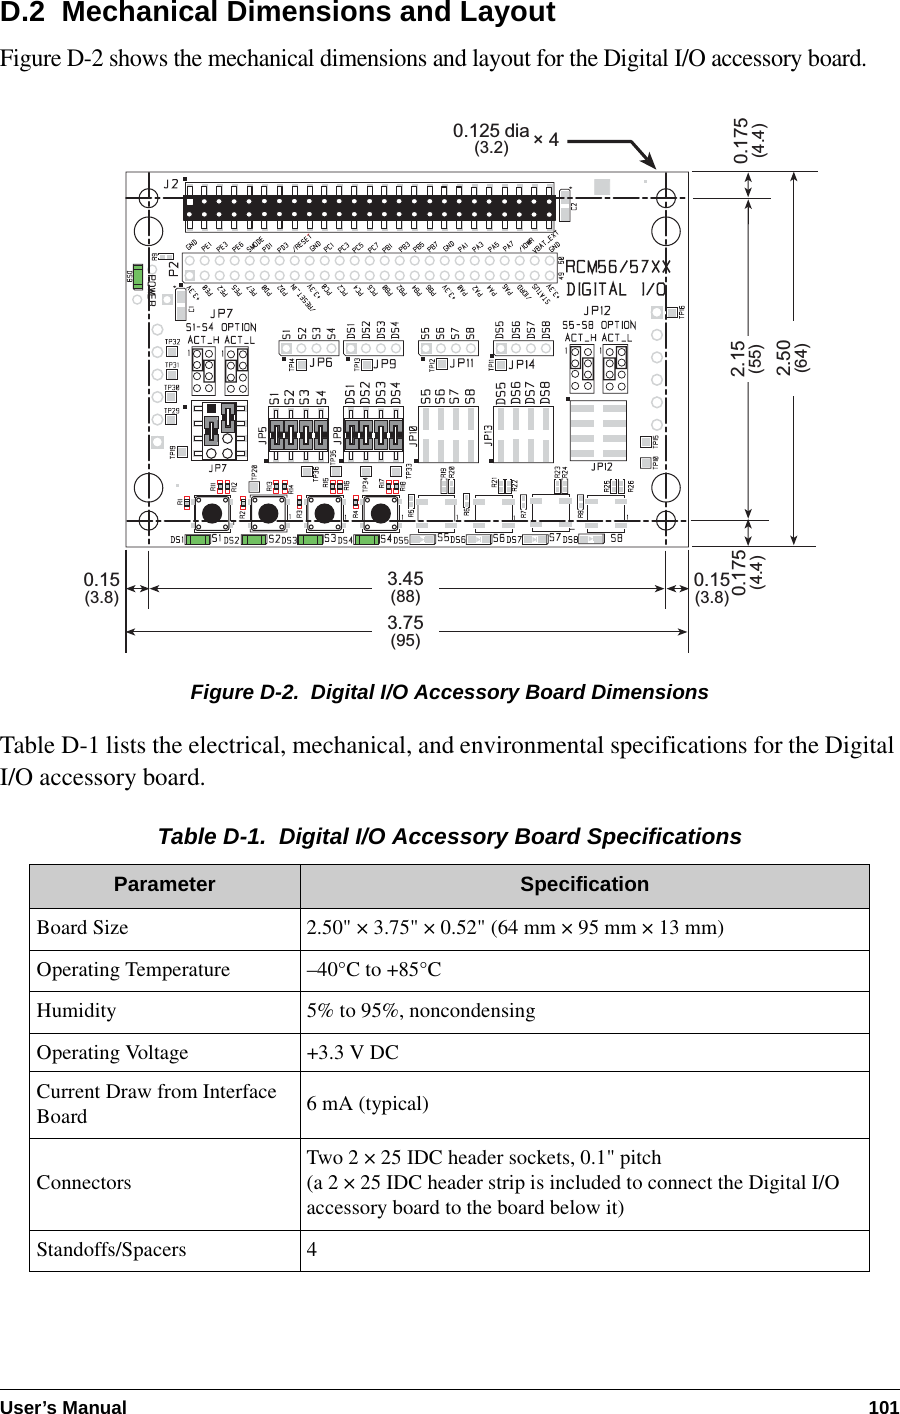 User’s Manual 101D.2  Mechanical Dimensions and LayoutFigure D-2 shows the mechanical dimensions and layout for the Digital I/O accessory board.Figure D-2.  Digital I/O Accessory Board DimensionsTable D-1 lists the electrical, mechanical, and environmental specifications for the Digital I/O accessory board.Table D-1.  Digital I/O Accessory Board SpecificationsParameter SpecificationBoard Size 2.50&quot; × 3.75&quot; × 0.52&quot; (64 mm × 95 mm × 13 mm)Operating Temperature –40°C to +85°CHumidity 5% to 95%, noncondensingOperating Voltage +3.3 V DCCurrent Draw from Interface Board 6 mA (typical)Connectors Two 2 × 25 IDC header sockets, 0.1&quot; pitch(a 2 × 25 IDC header strip is included to connect the Digital I/O accessory board to the board below it)Standoffs/Spacers 40.15(3.8)0.15(3.8)0.175(4.4)3.45(88)3.75(95)2.50(64)0.175(4.4)× 40.125 dia(3.2)2.15(55)